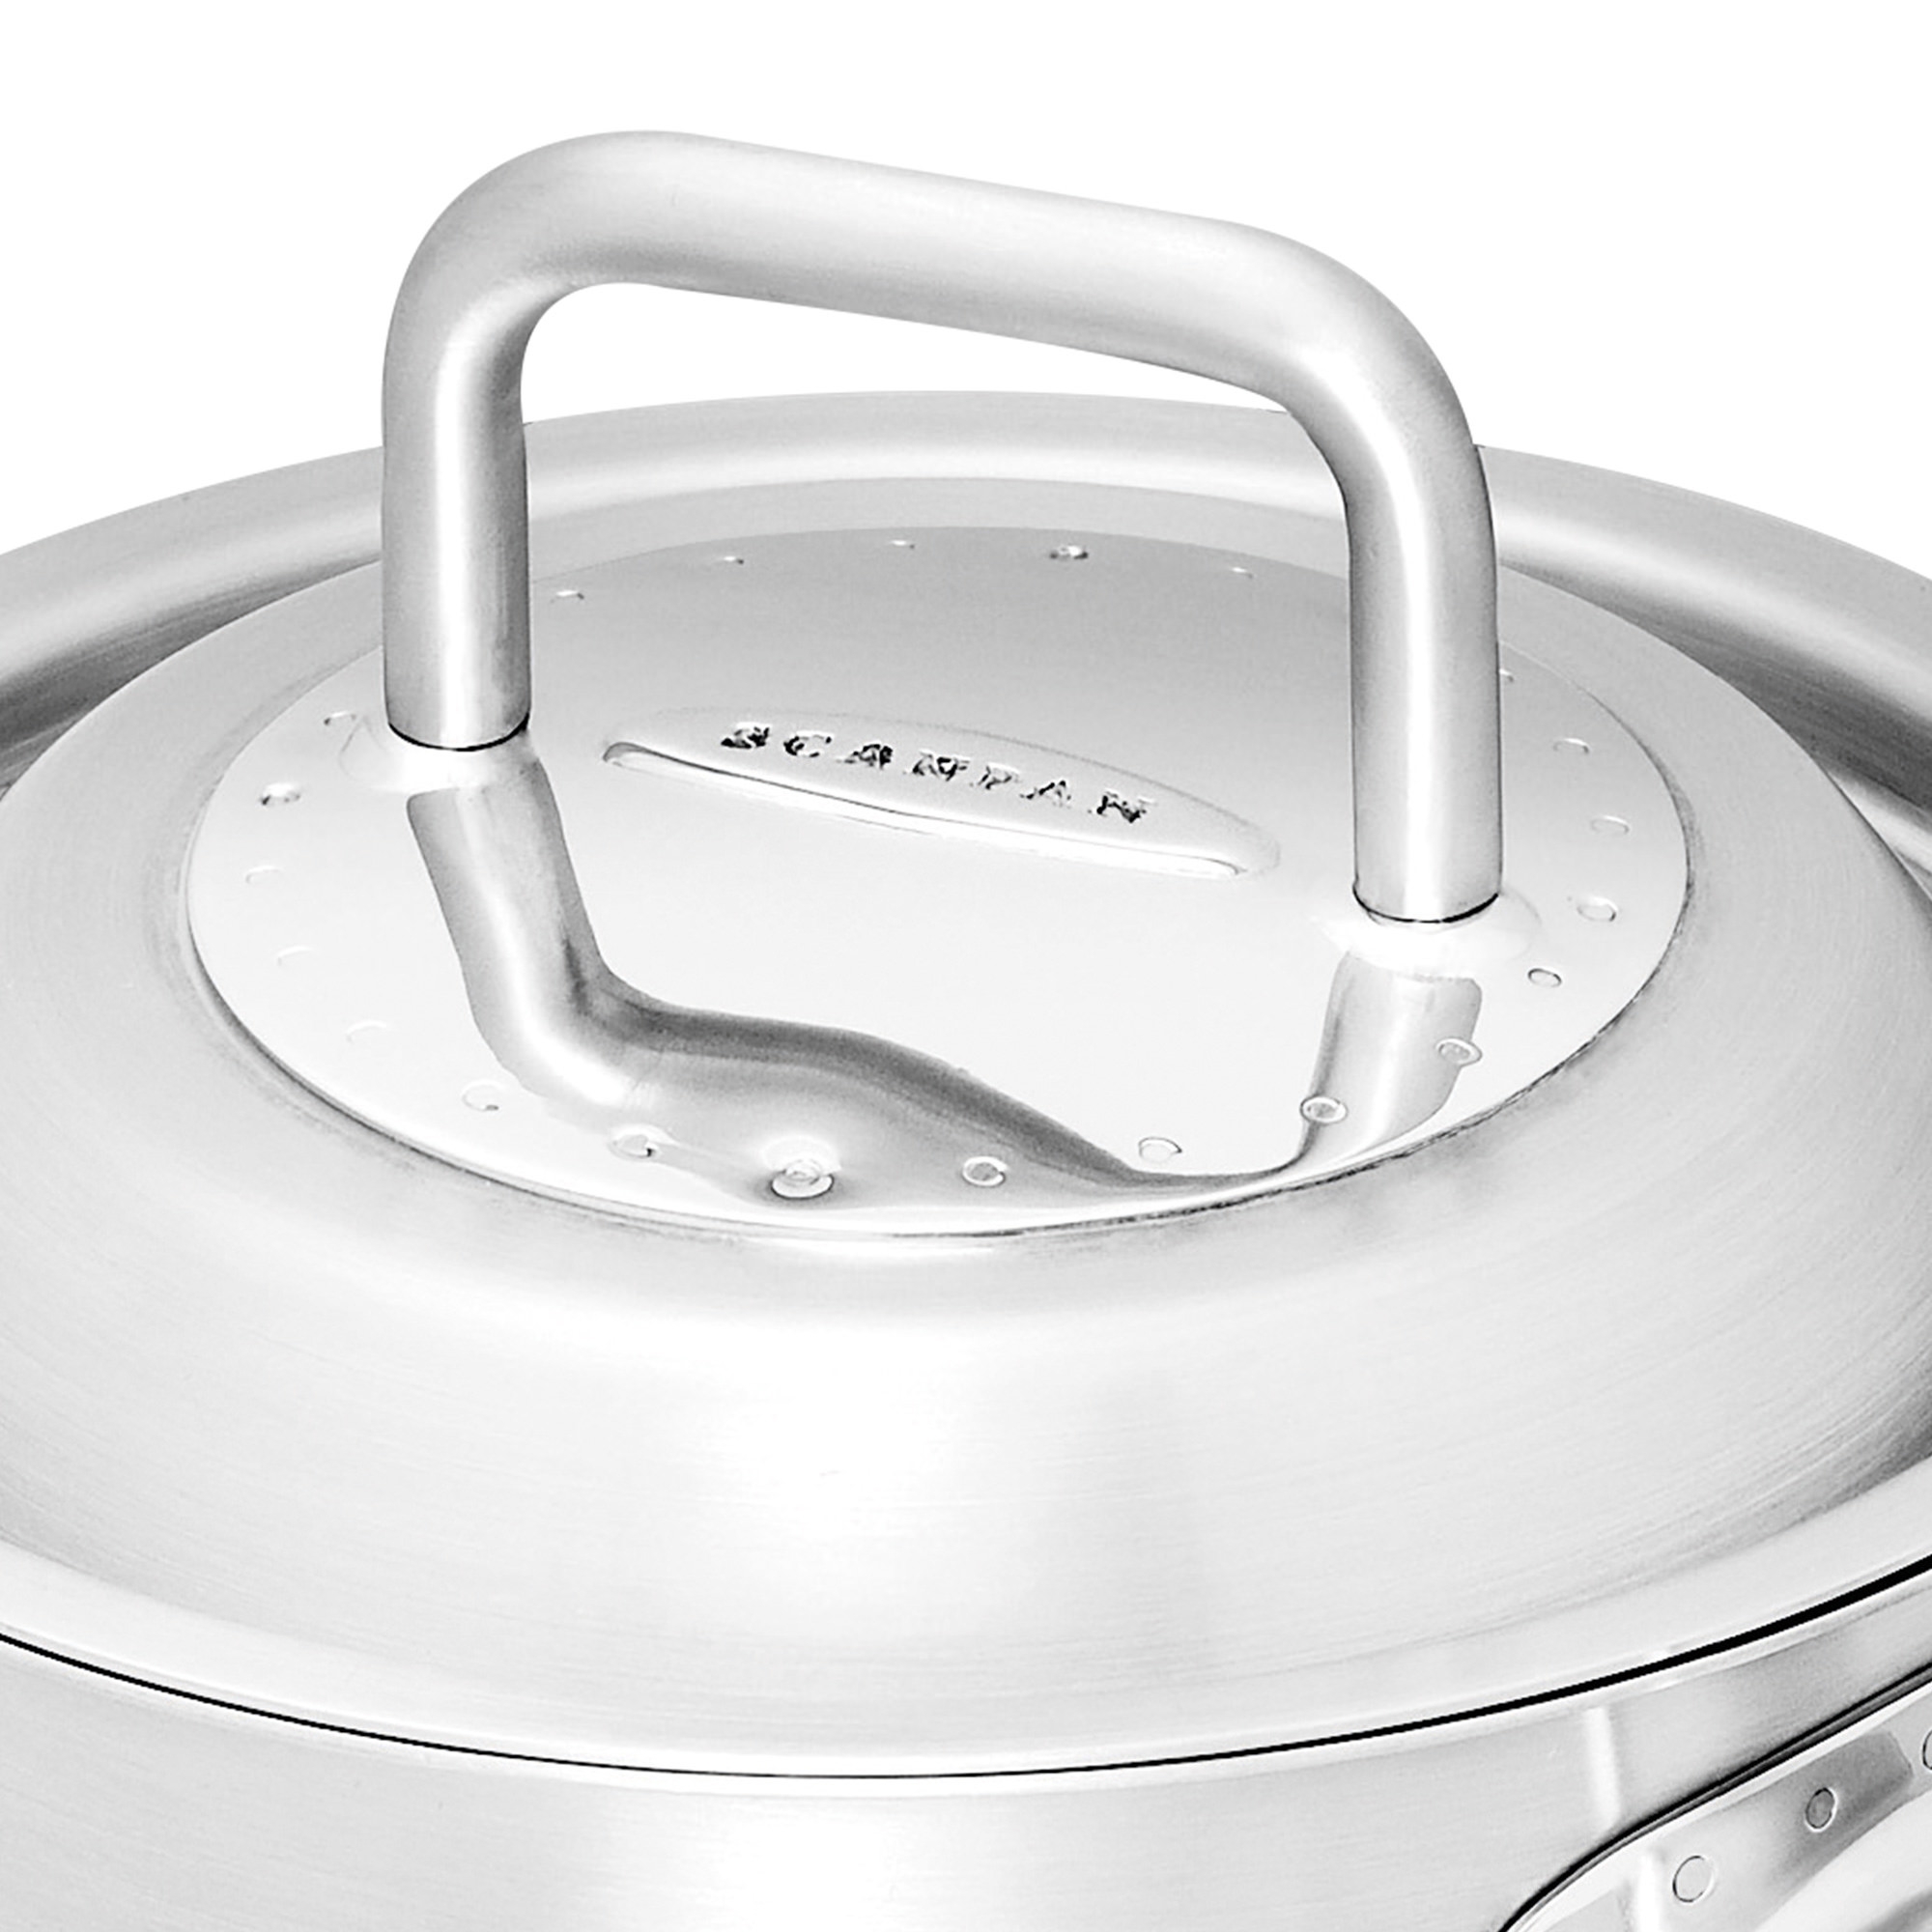 Scanpan Commercial Stainless Steel Covered Saucepan 14cm - 1.2L Image 2